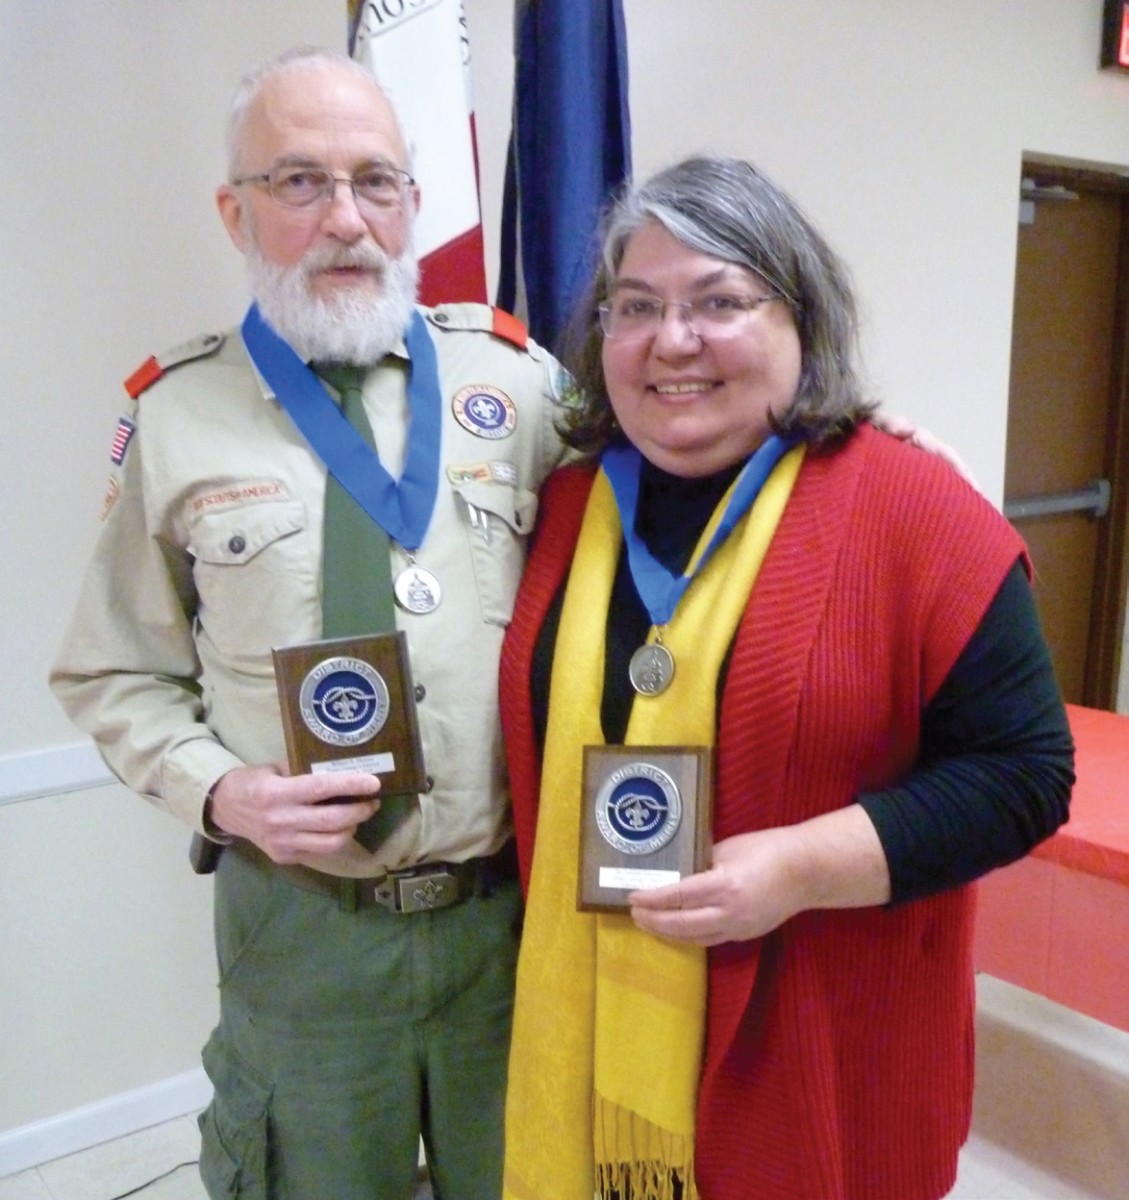 Troop 224 Scoutmaster Bill Thomas and his wife, Dr. Cathleen Hapeman, were awarded the Prince George’s Scouting District Award of Merit on February 8. Since he became scoutmaster in 2001, the number of Eagle Scouts from the troop has skyrocketed. Credit: Colleen Aistis 